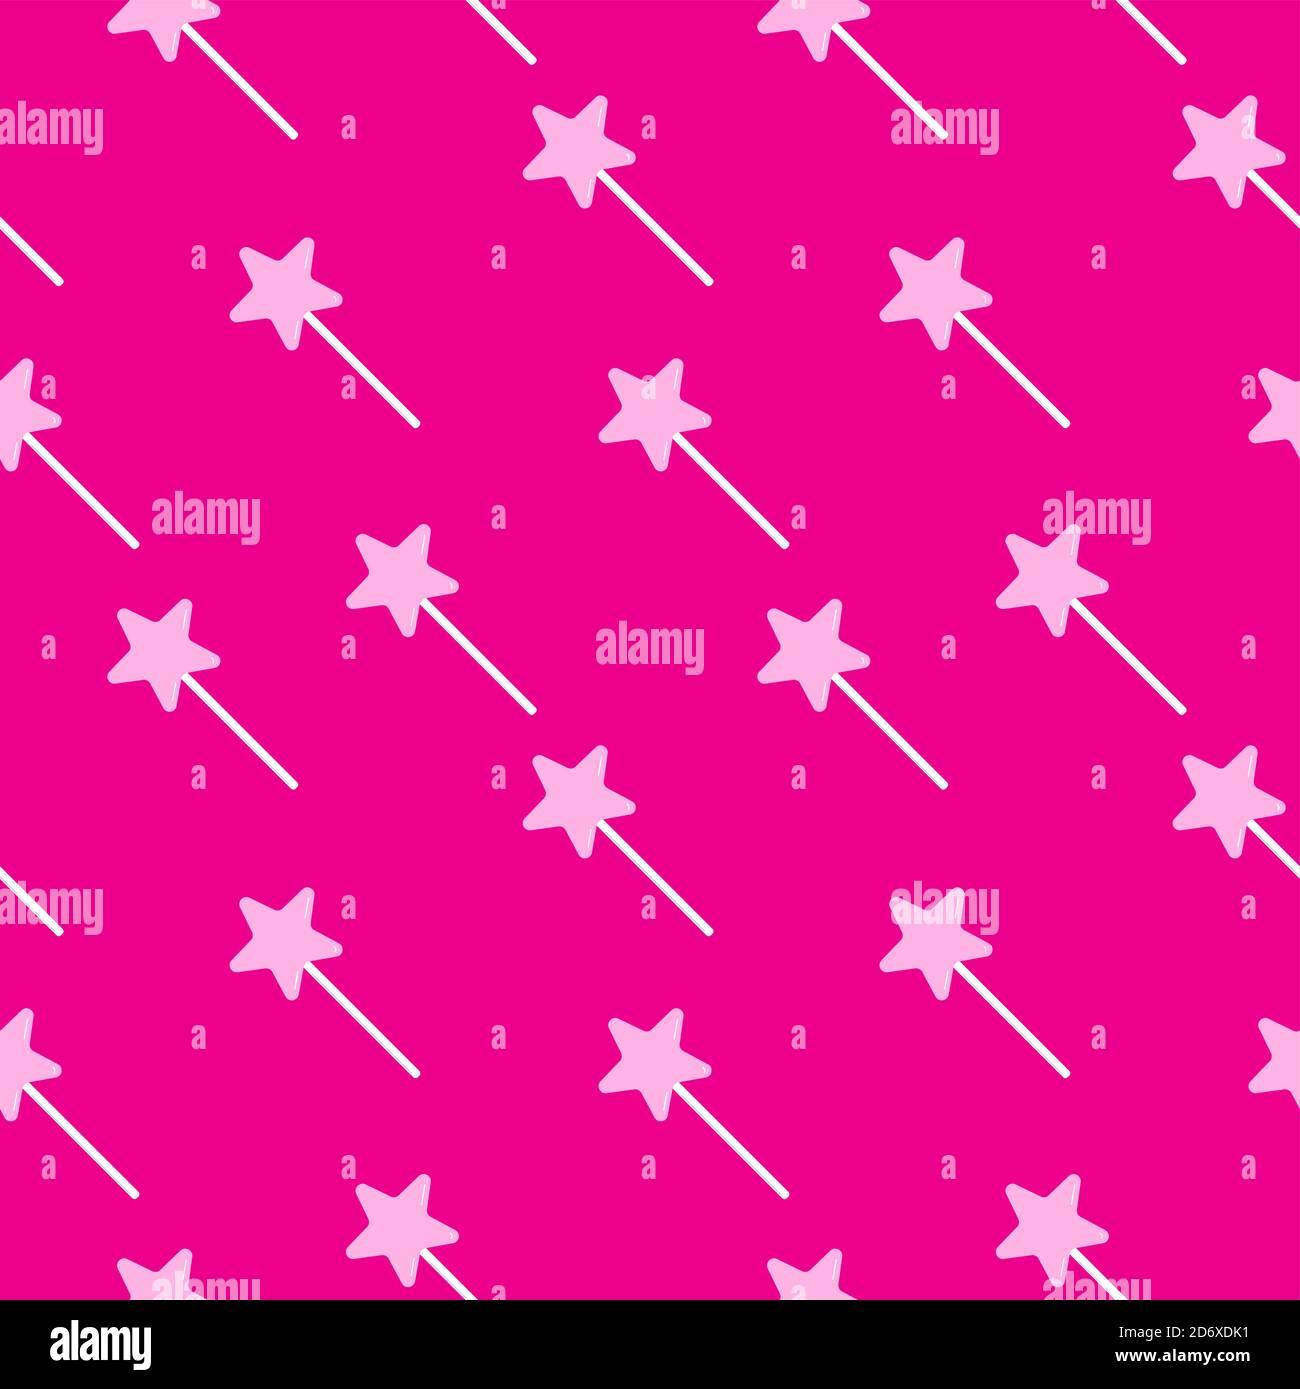 Pink Star Shaped Lollipop Seamless Pattern On Magenta Color